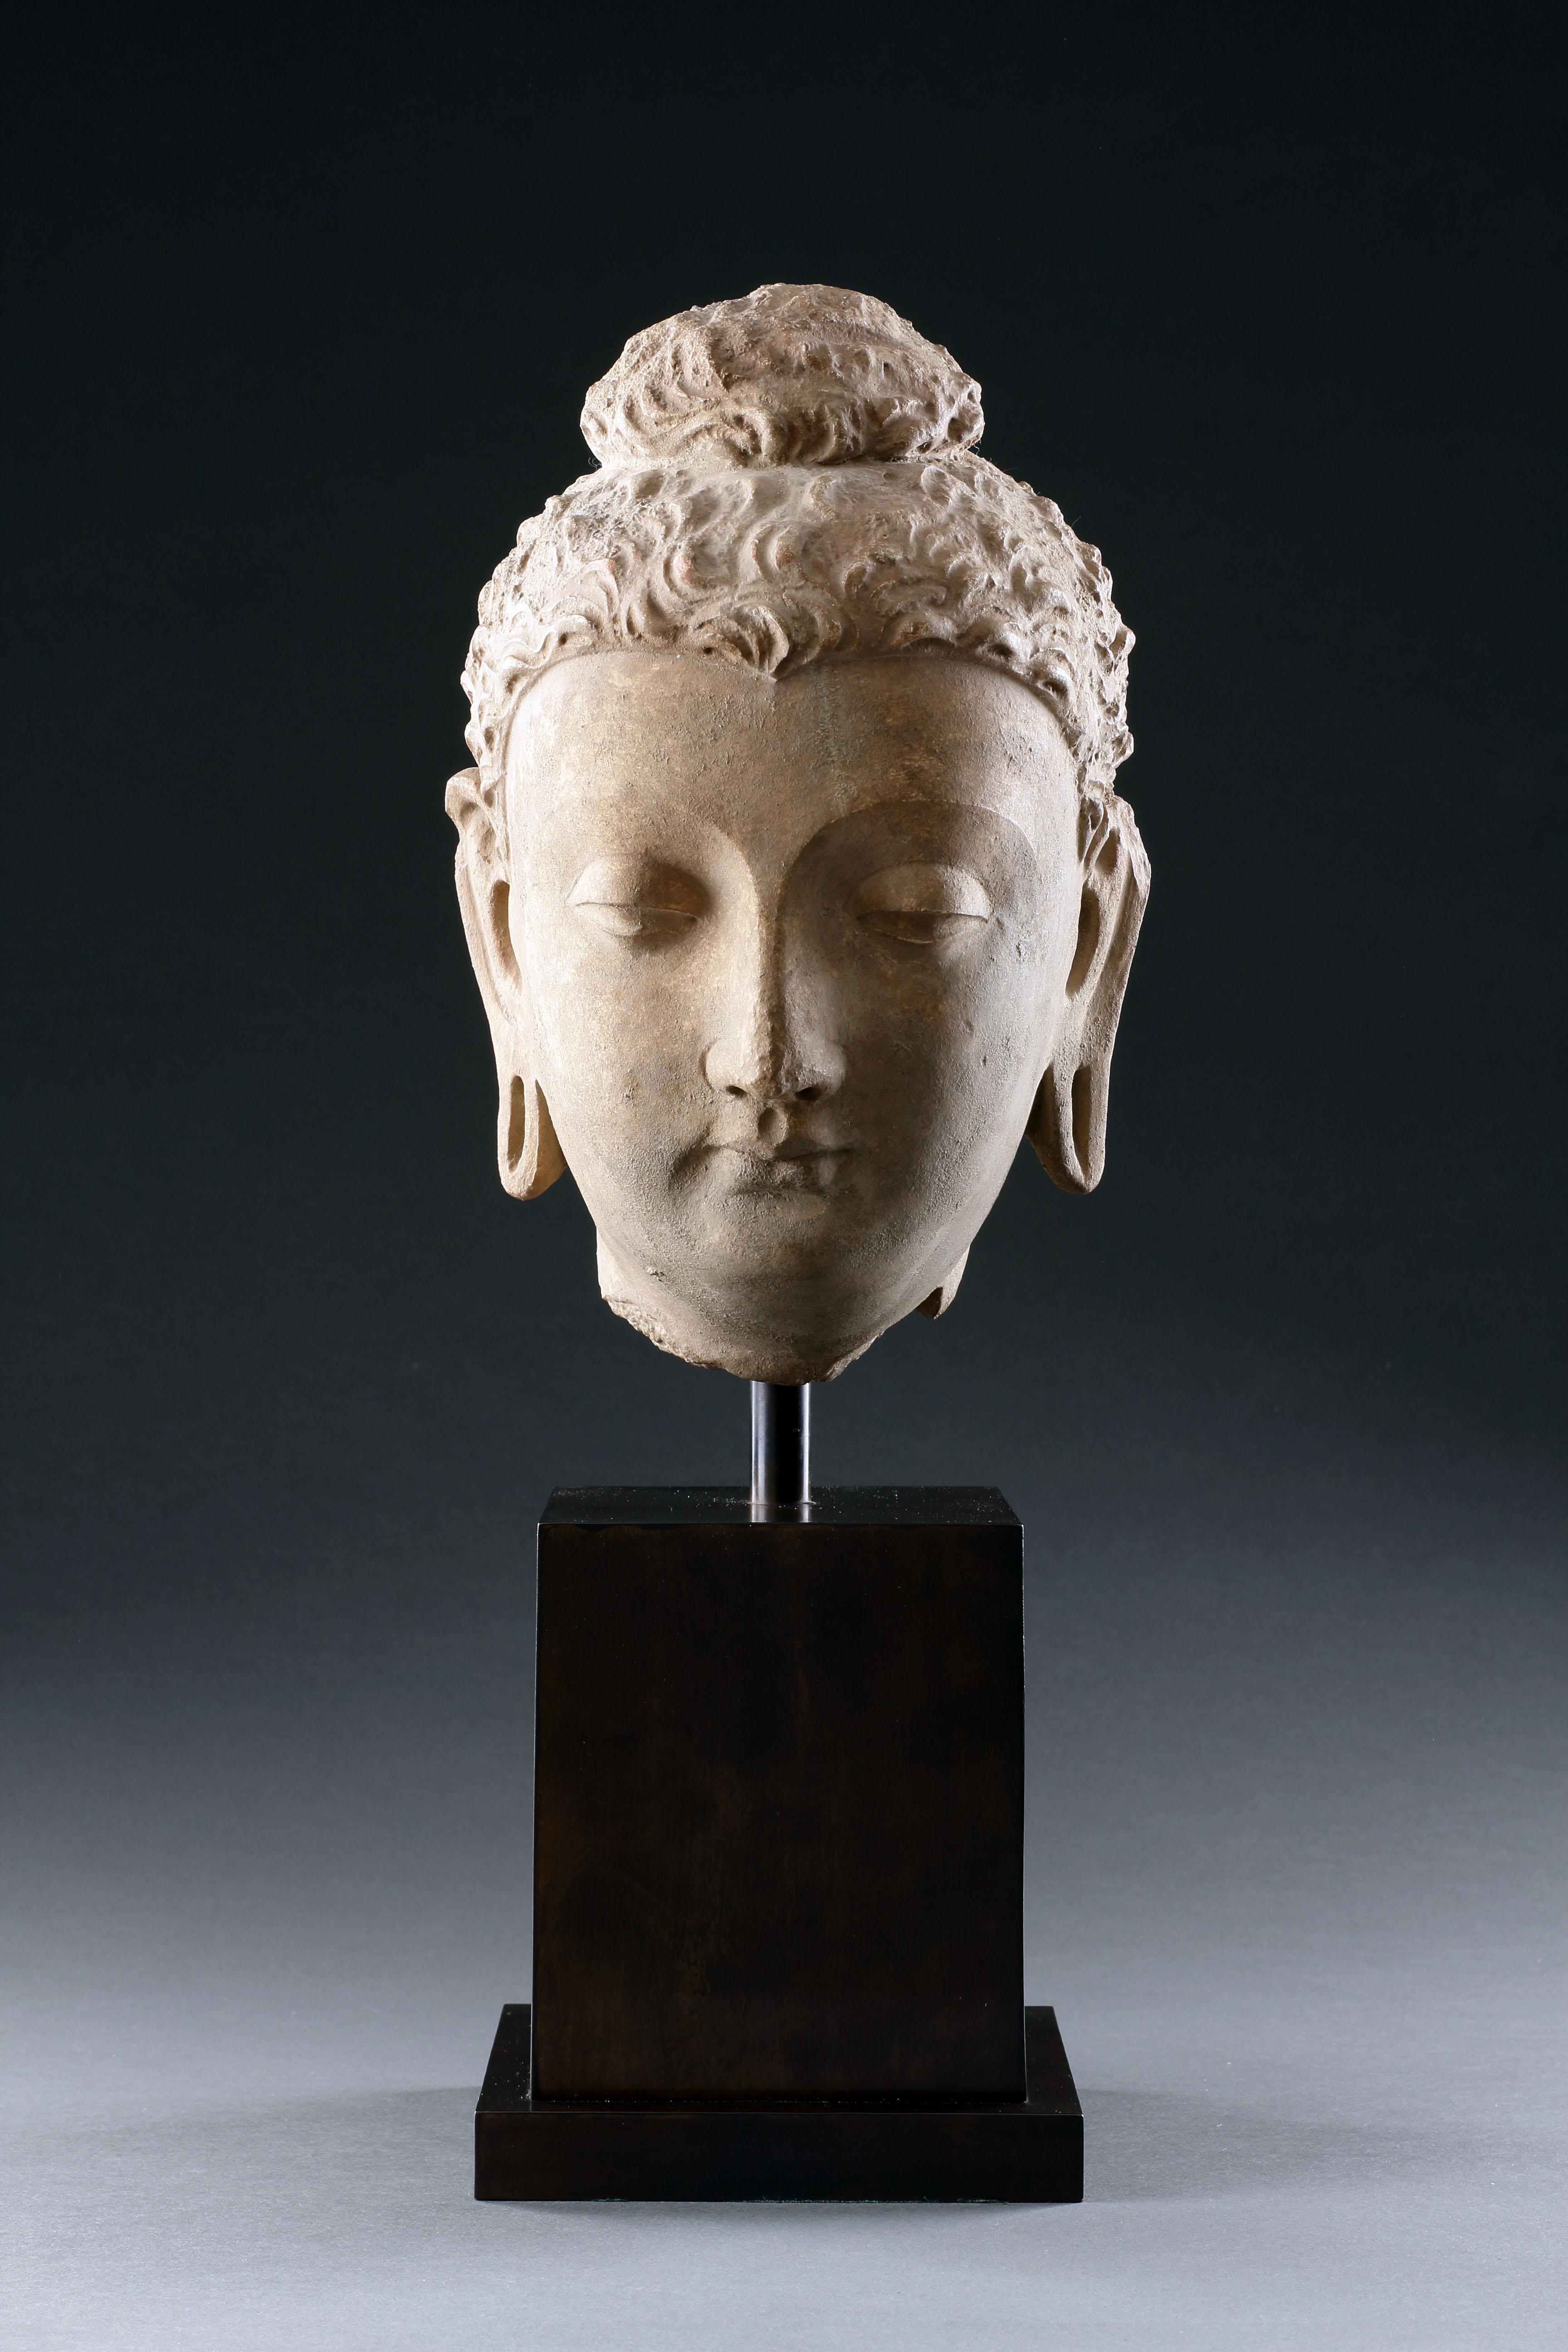 A Fine Gandharan Head of a Buddha 
Stucco with ‘earth pigment’ 
Some old ‘restoration’ to the nose
Afghanistan 

3rd Century AD

Size: 26cm high, 14.5cm wide, 14cm deep - 10¼ ins high, 5¾ ins wide, 5½ ins deep 

Provenance:
Michael Dollard, New